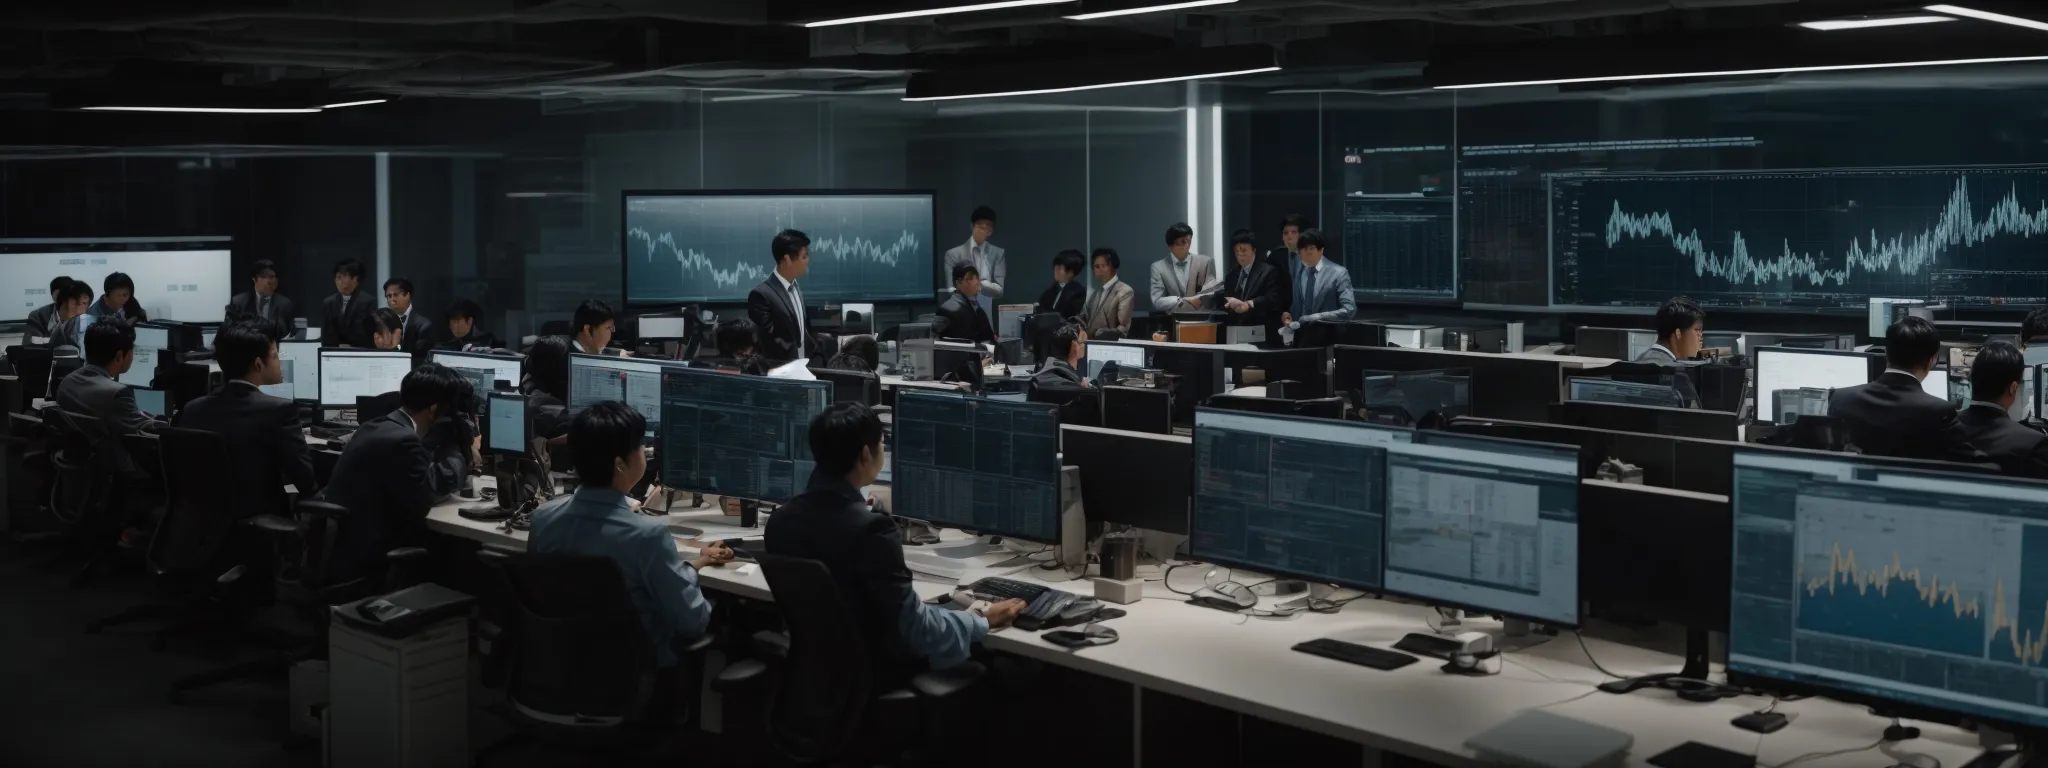 a bustling open-plan office with content creators intently analyzing data dashboards on large screens.